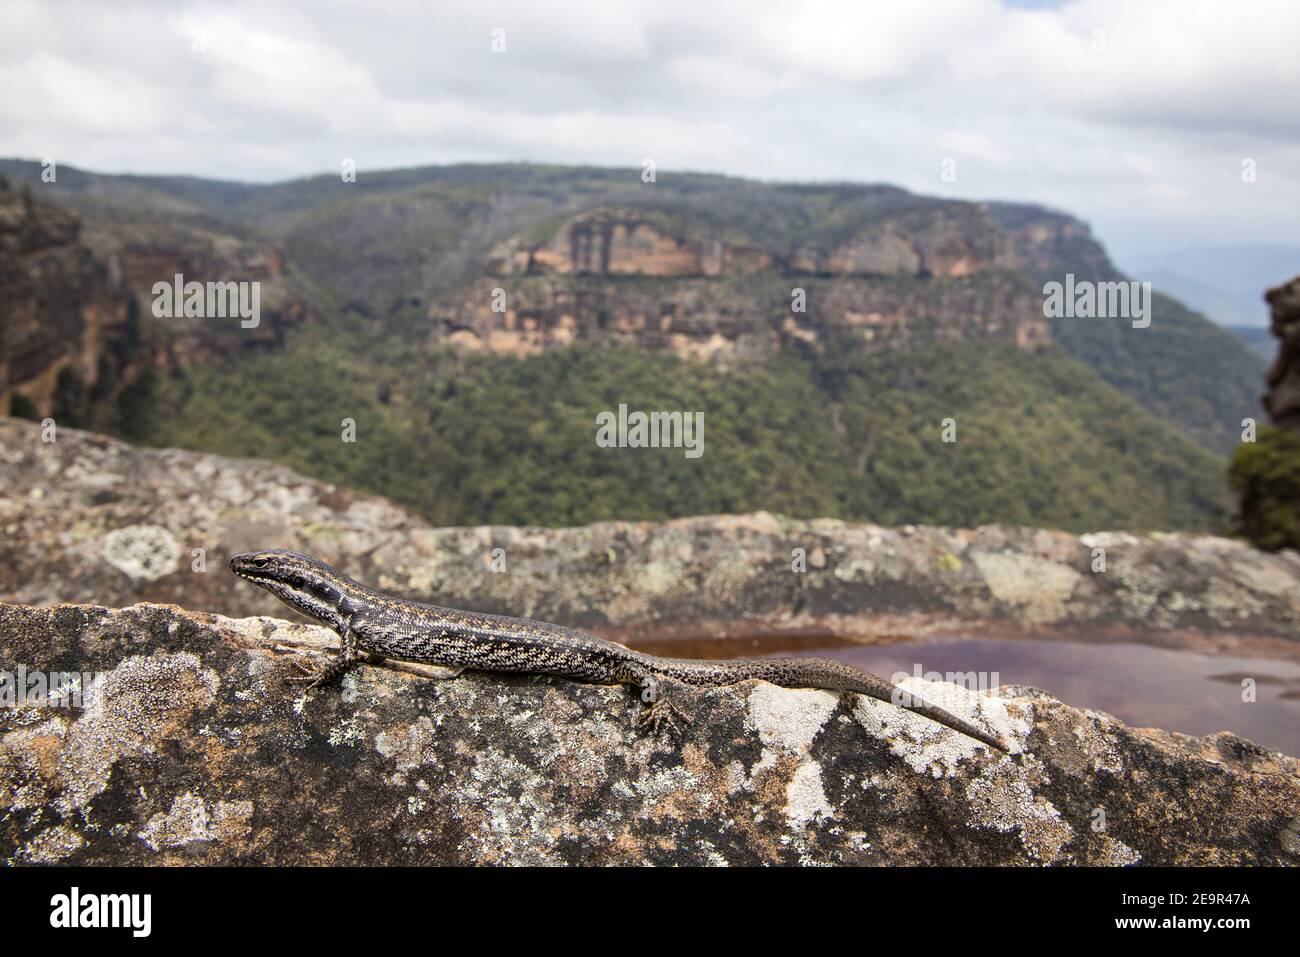 Warm Temperate Water Skink basking with the Blue Mountains escarpment in the background, NSW Australia Stock Photo